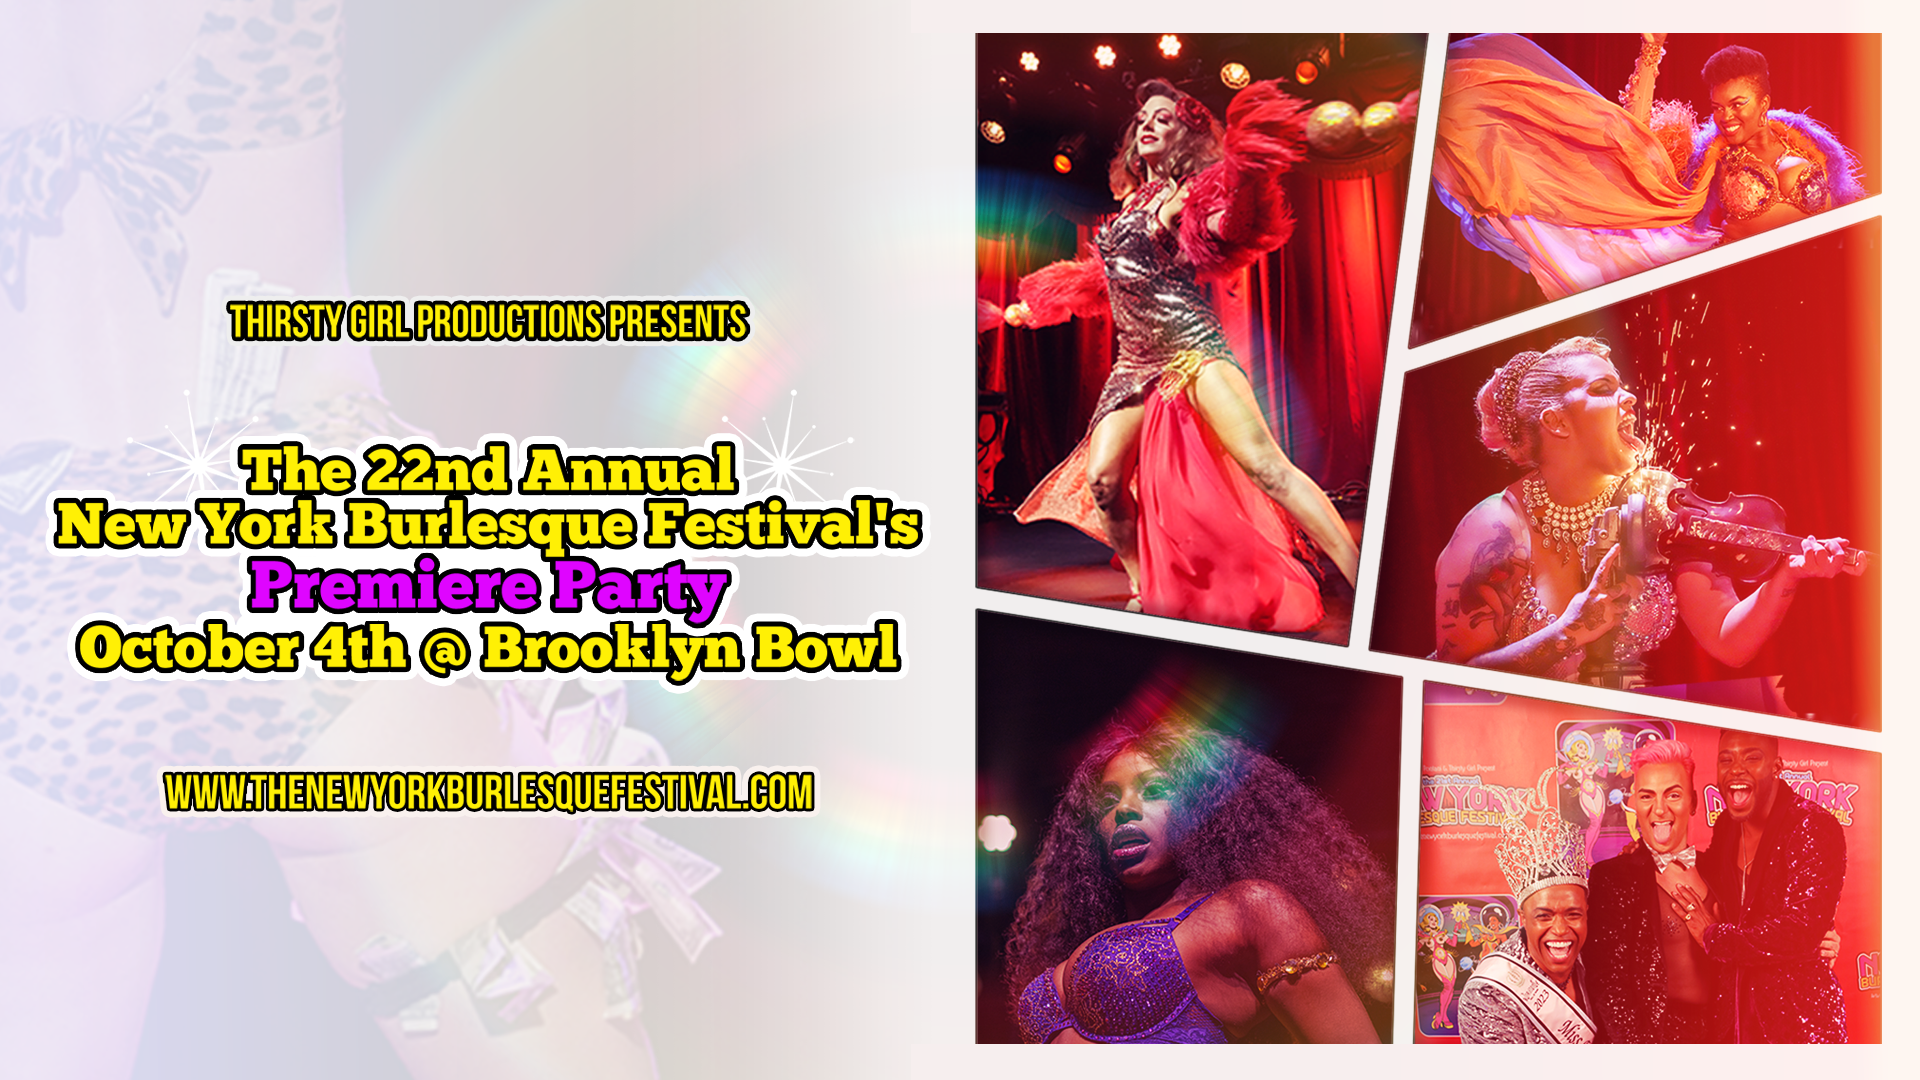 More Info for The 22nd Annual New York Burlesque Festival's Premiere Party!